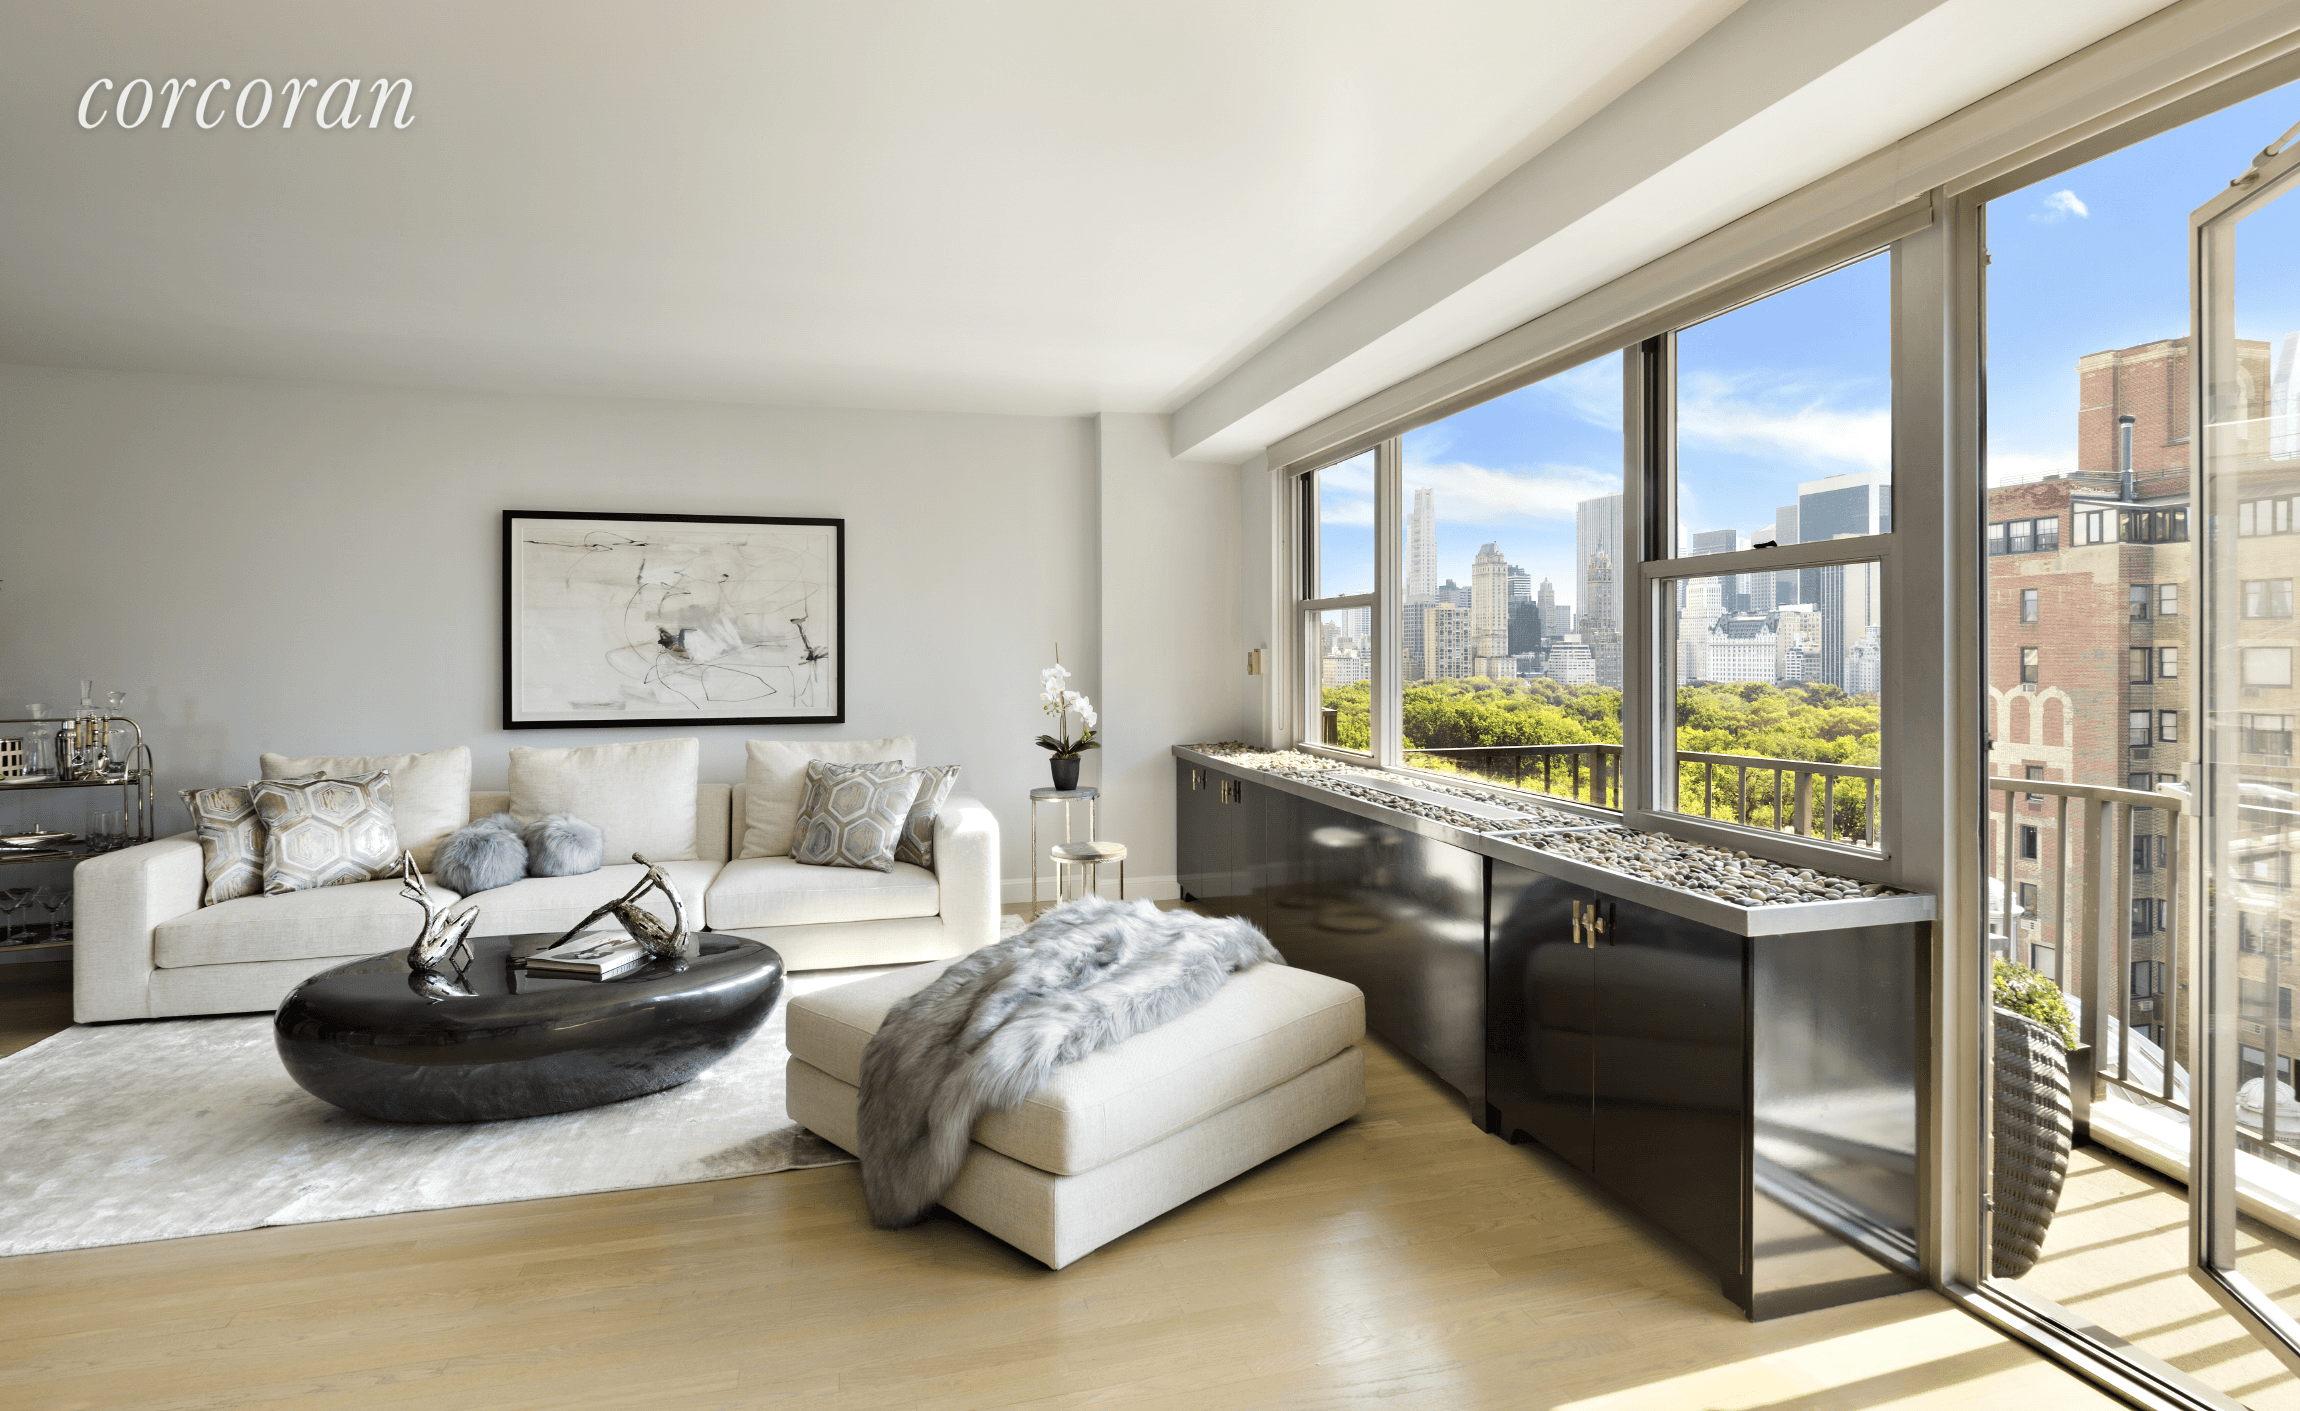 This high floor three bedroom, three bath co op apartment with two balconies offers a unique layout perfect for entertaining and relaxing.